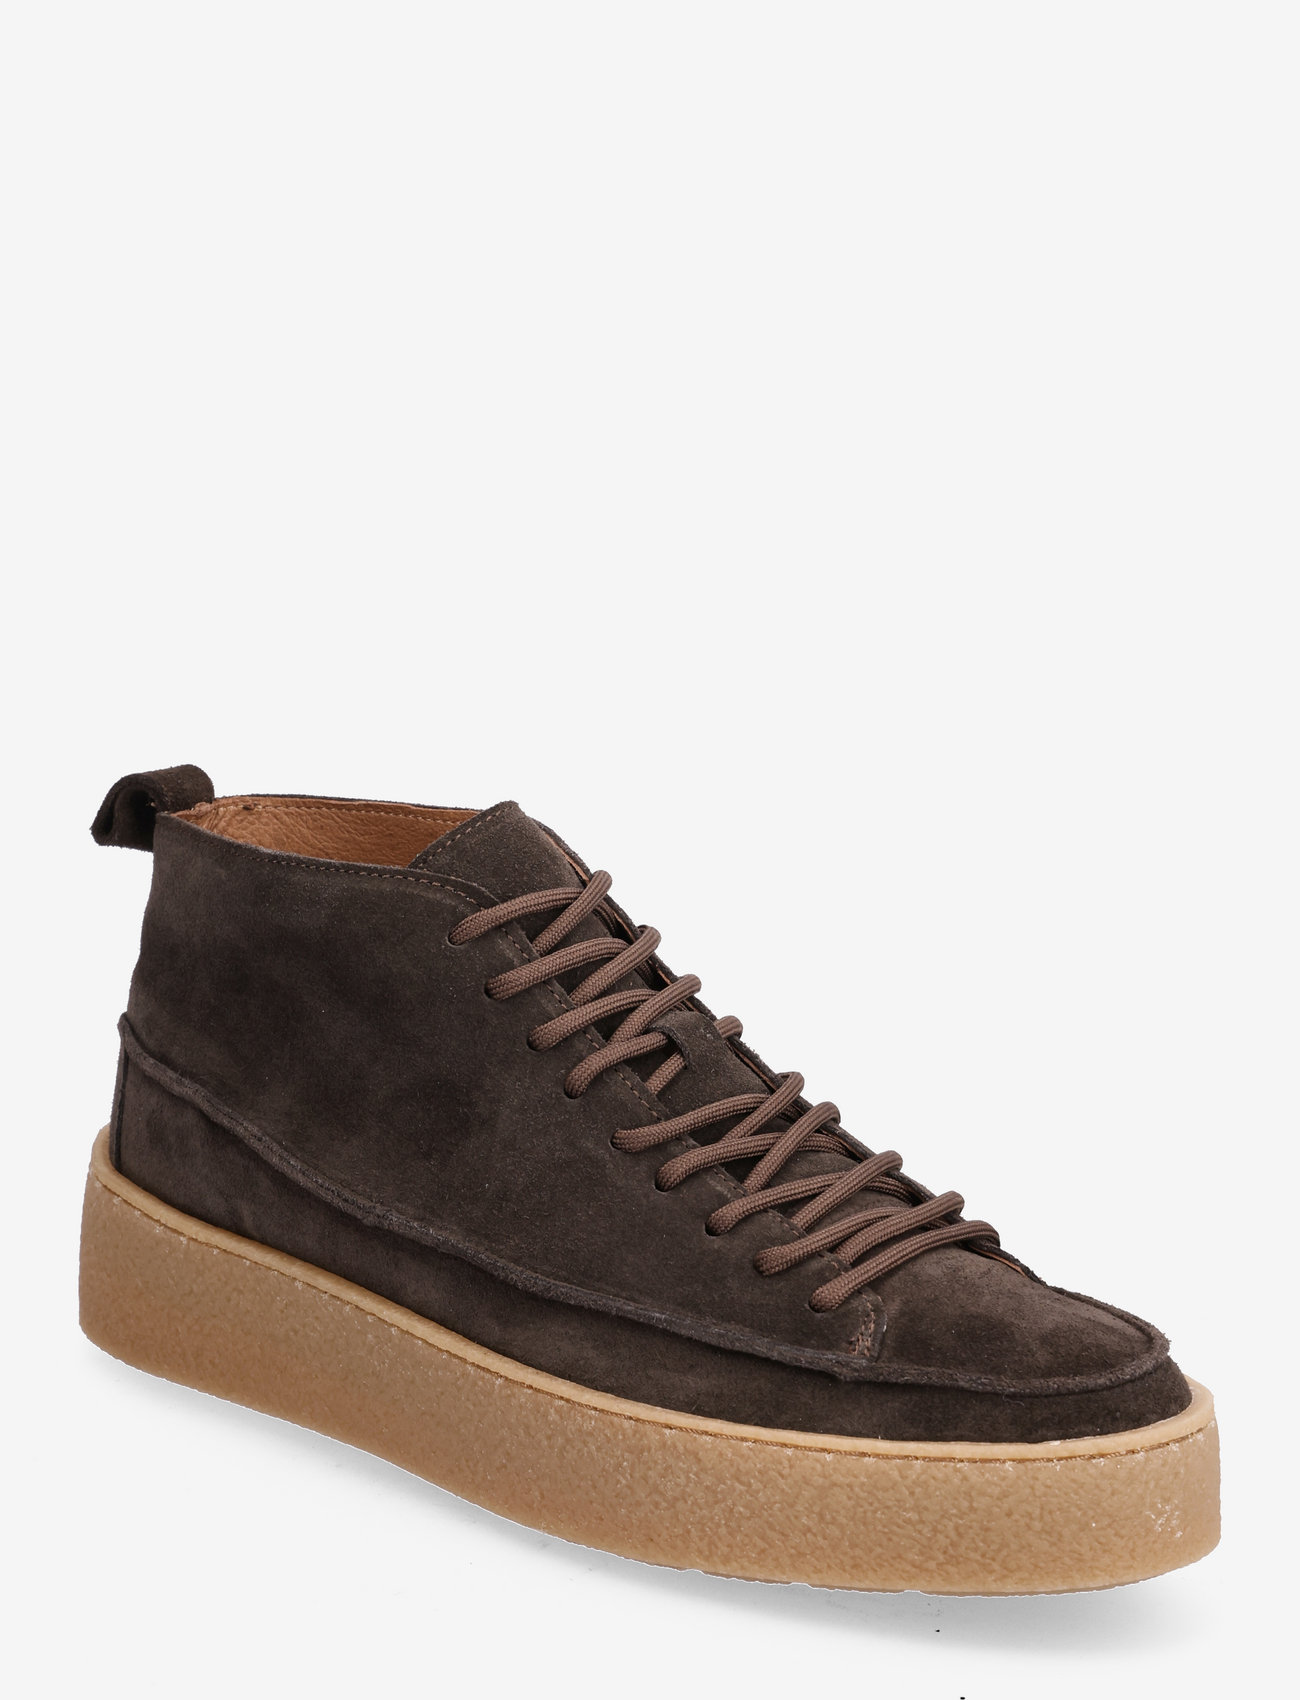 Selected Homme - SLHCRISTER SUEDE BOOT B - låga sneakers - demitasse - 0